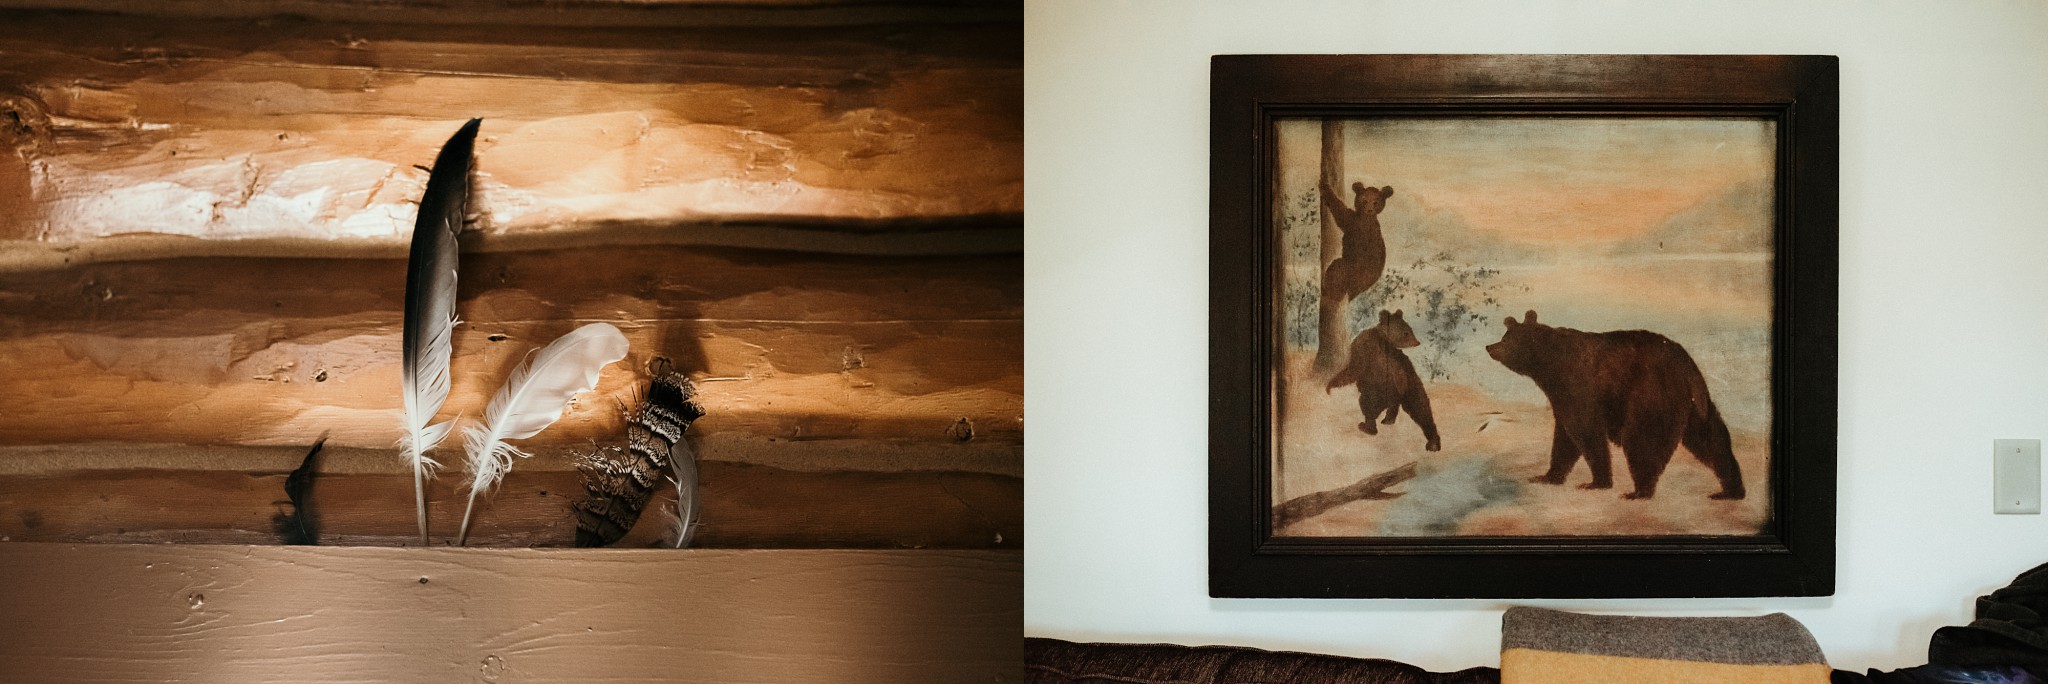 A collection of feathers and a painting of black bears.